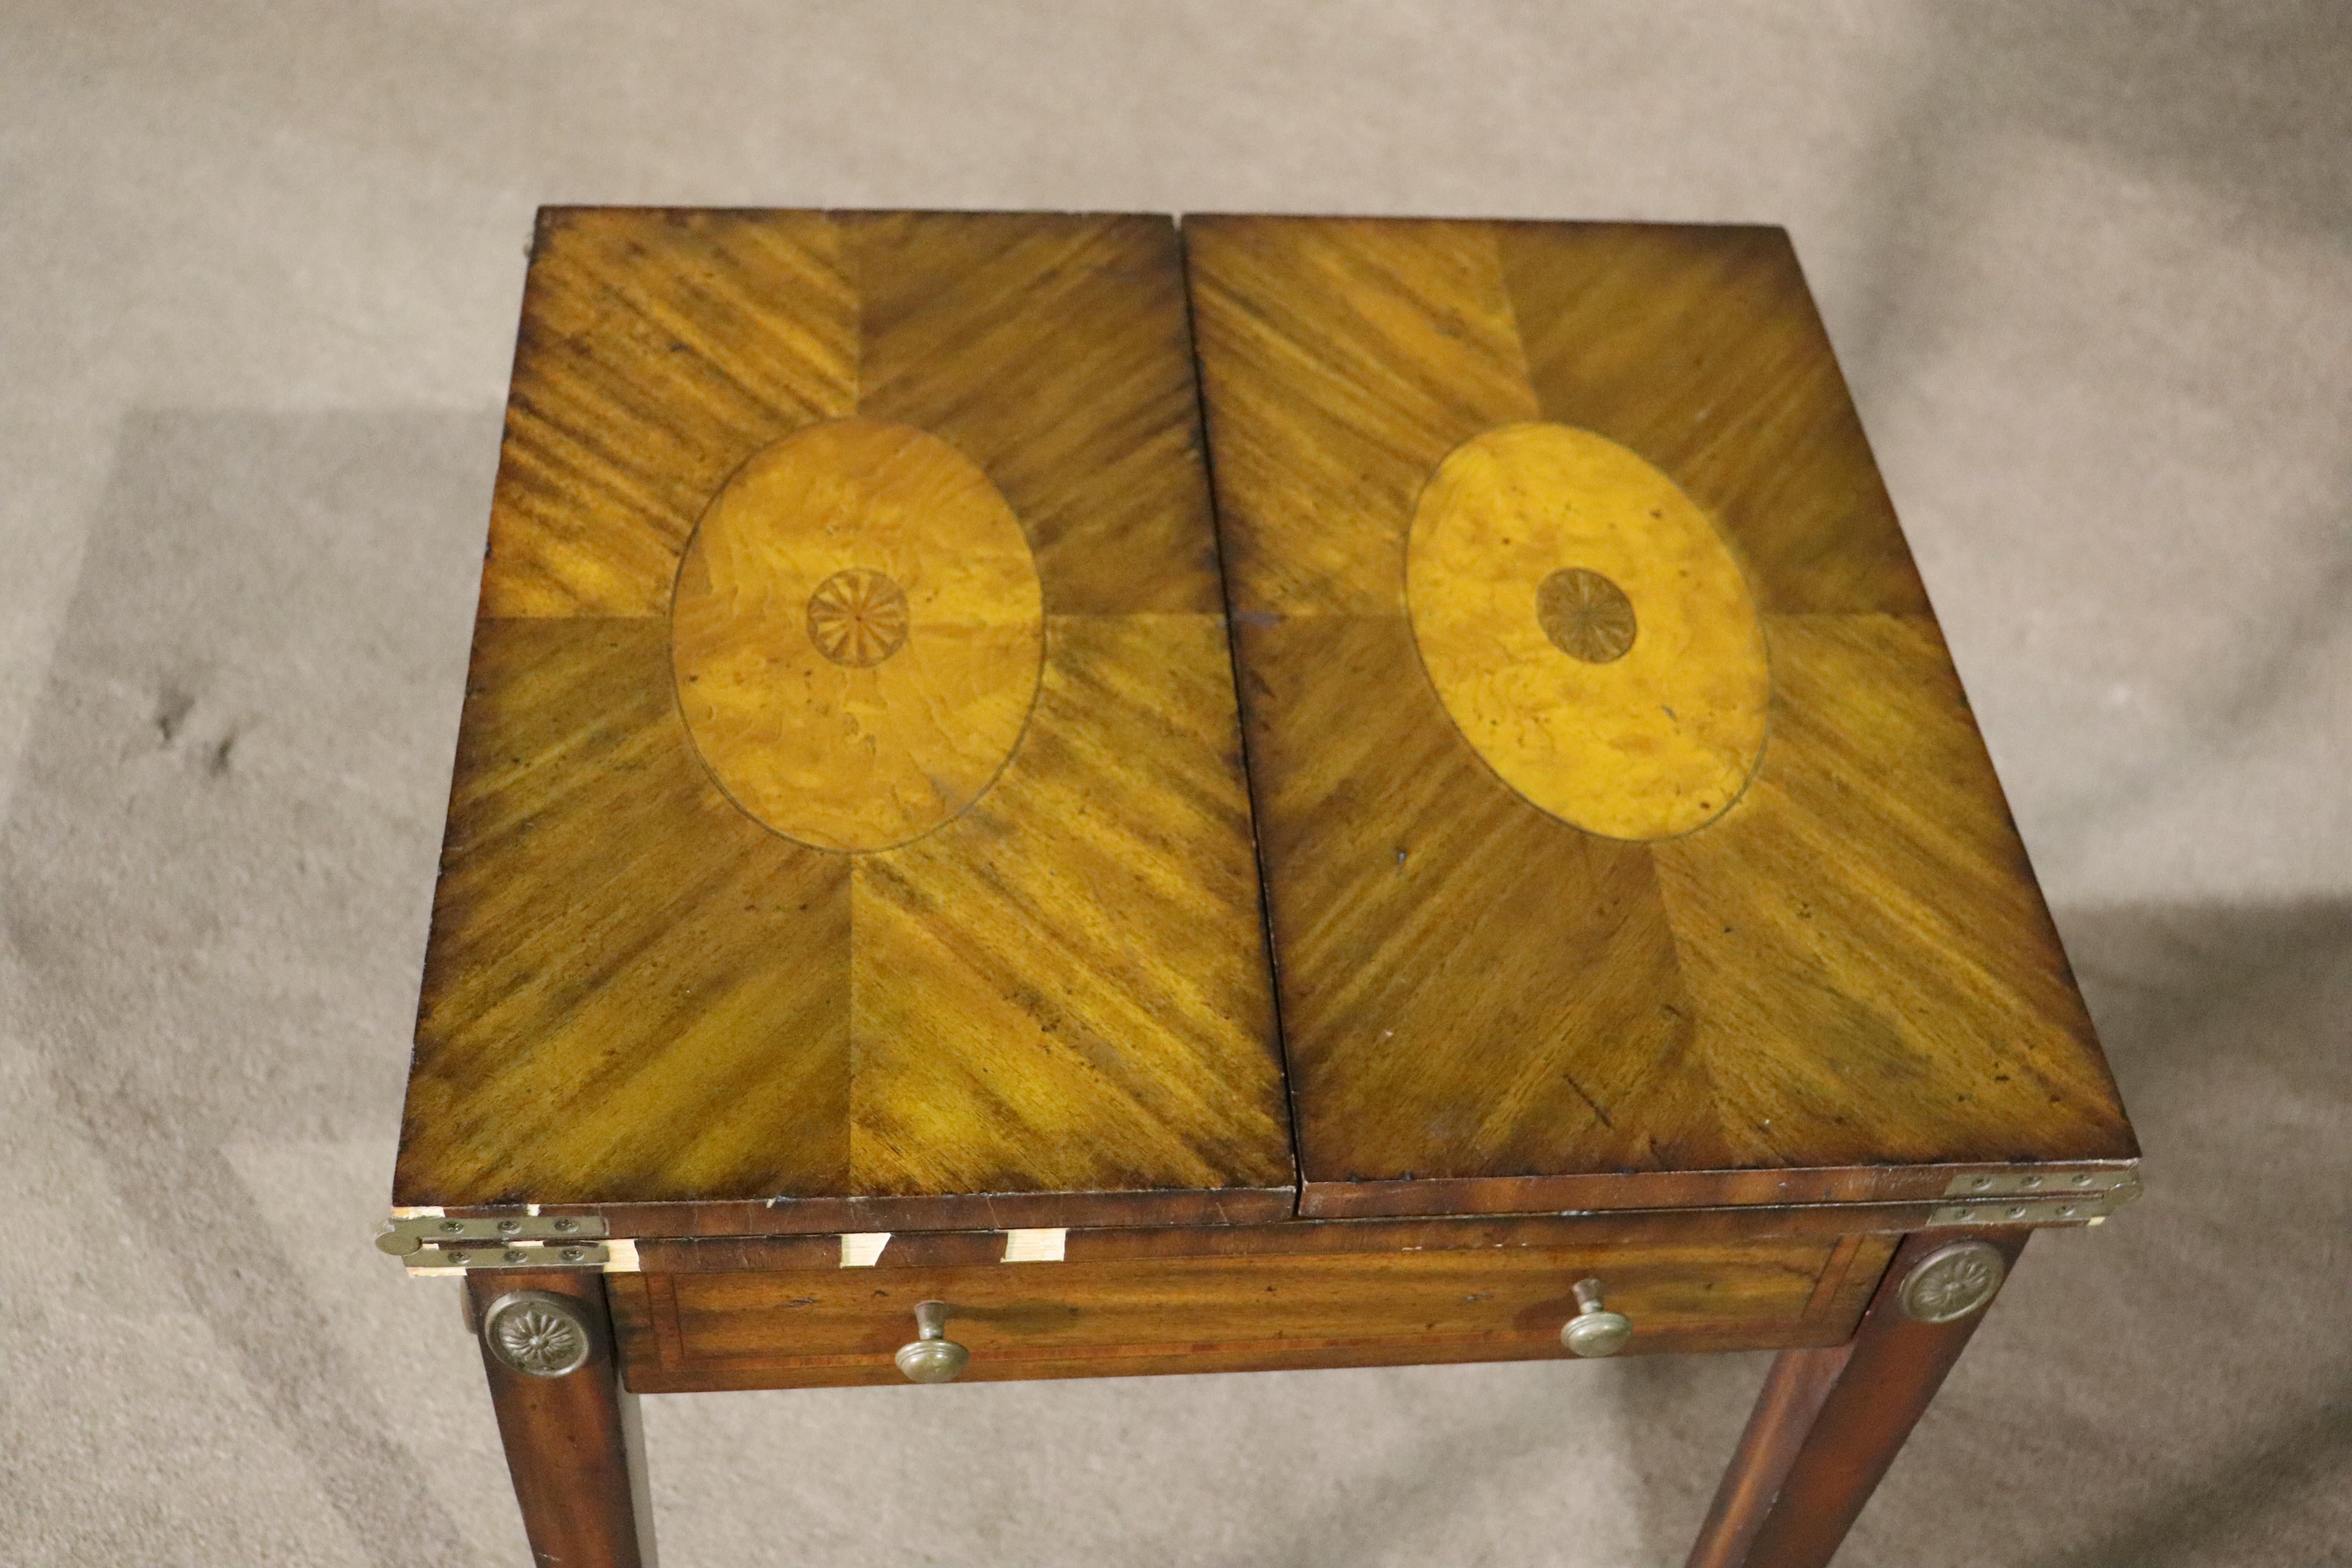 Antique style game table made by Maitland Smith. Beautiful inlay top that drops down to expose a checkerboard game table and leather topped leaves.
Please confirm location NY or NJ